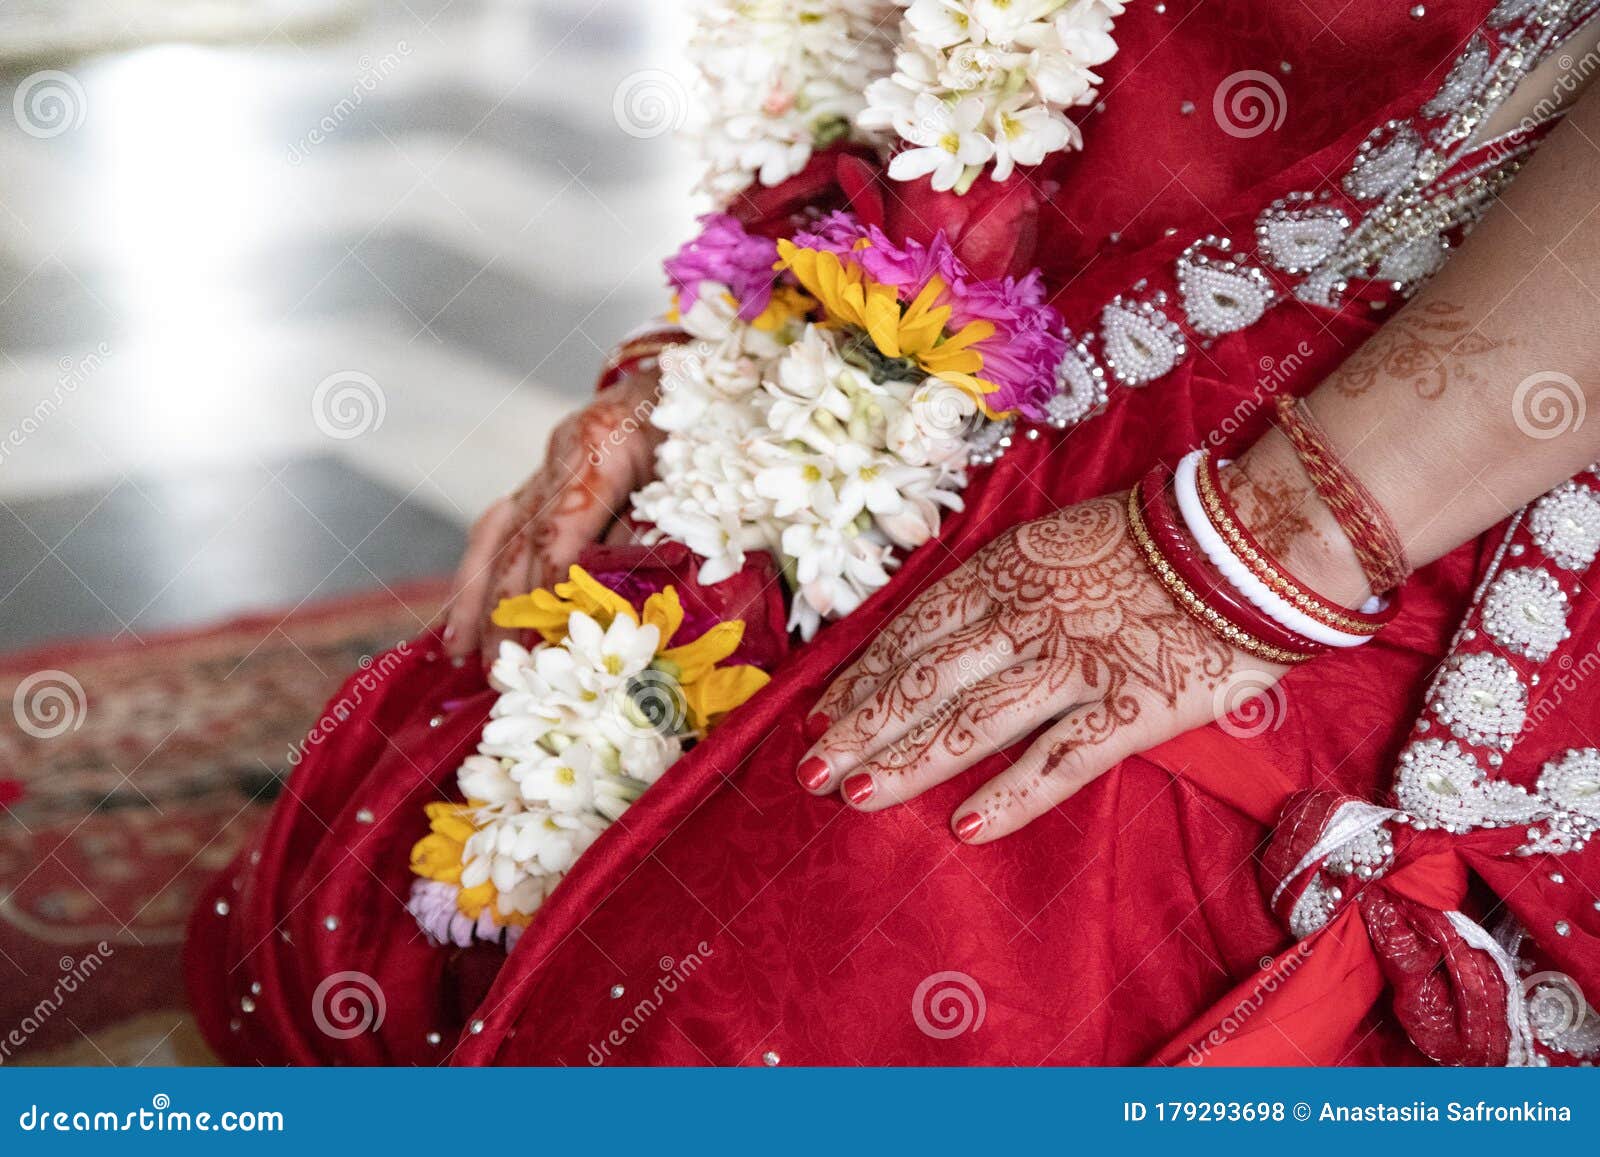 Bride in a Red Sari. Beautiful Traditional Indian Wedding Ceremony ...